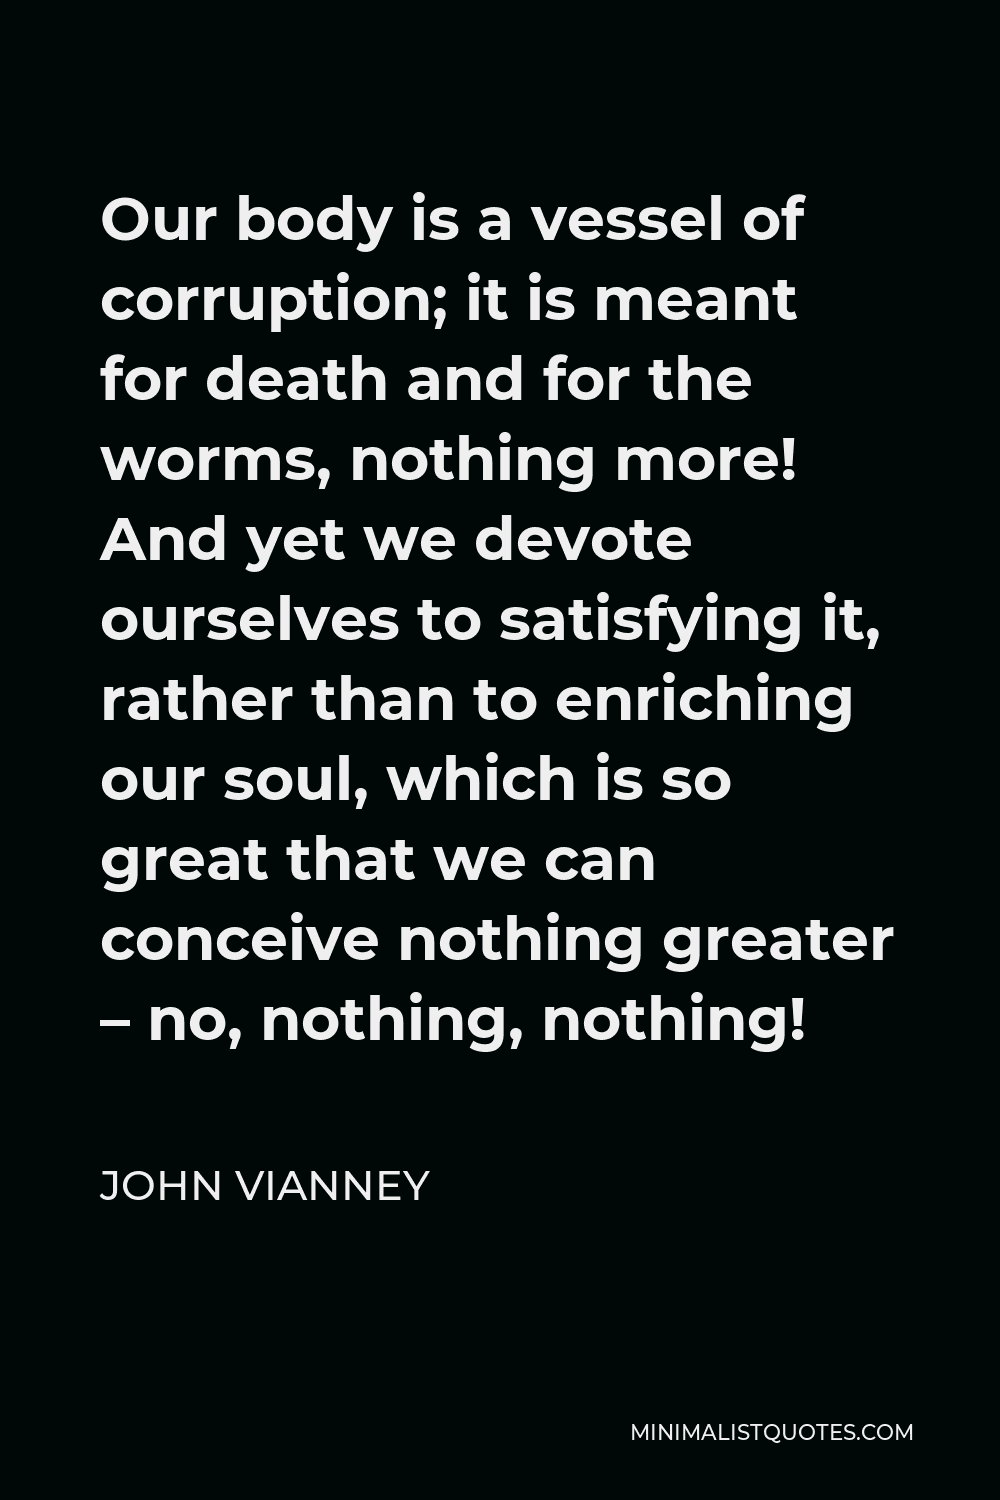 John Vianney Quote - Our body is a vessel of corruption; it is meant for death and for the worms, nothing more! And yet we devote ourselves to satisfying it, rather than to enriching our soul, which is so great that we can conceive nothing greater – no, nothing, nothing!